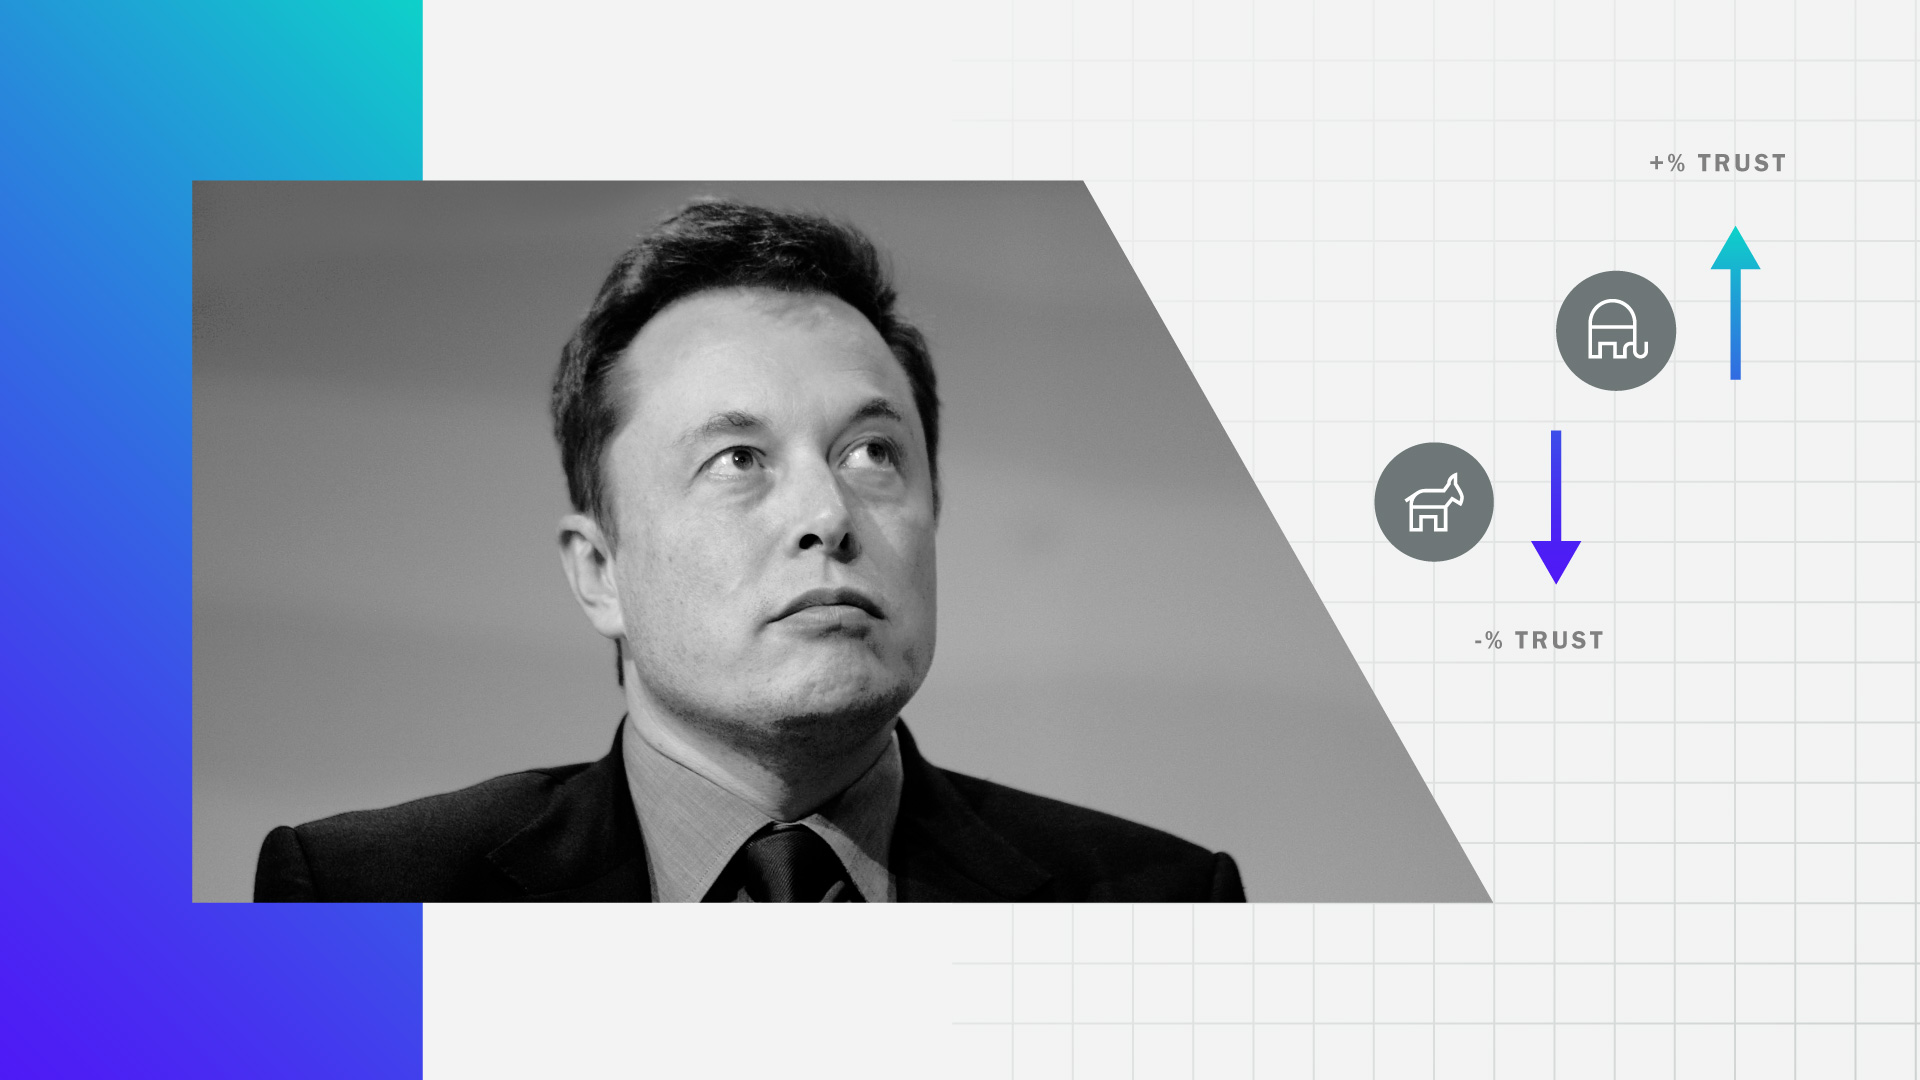 Graphic conveying Democrat and Republican views of Elon Musk's brands